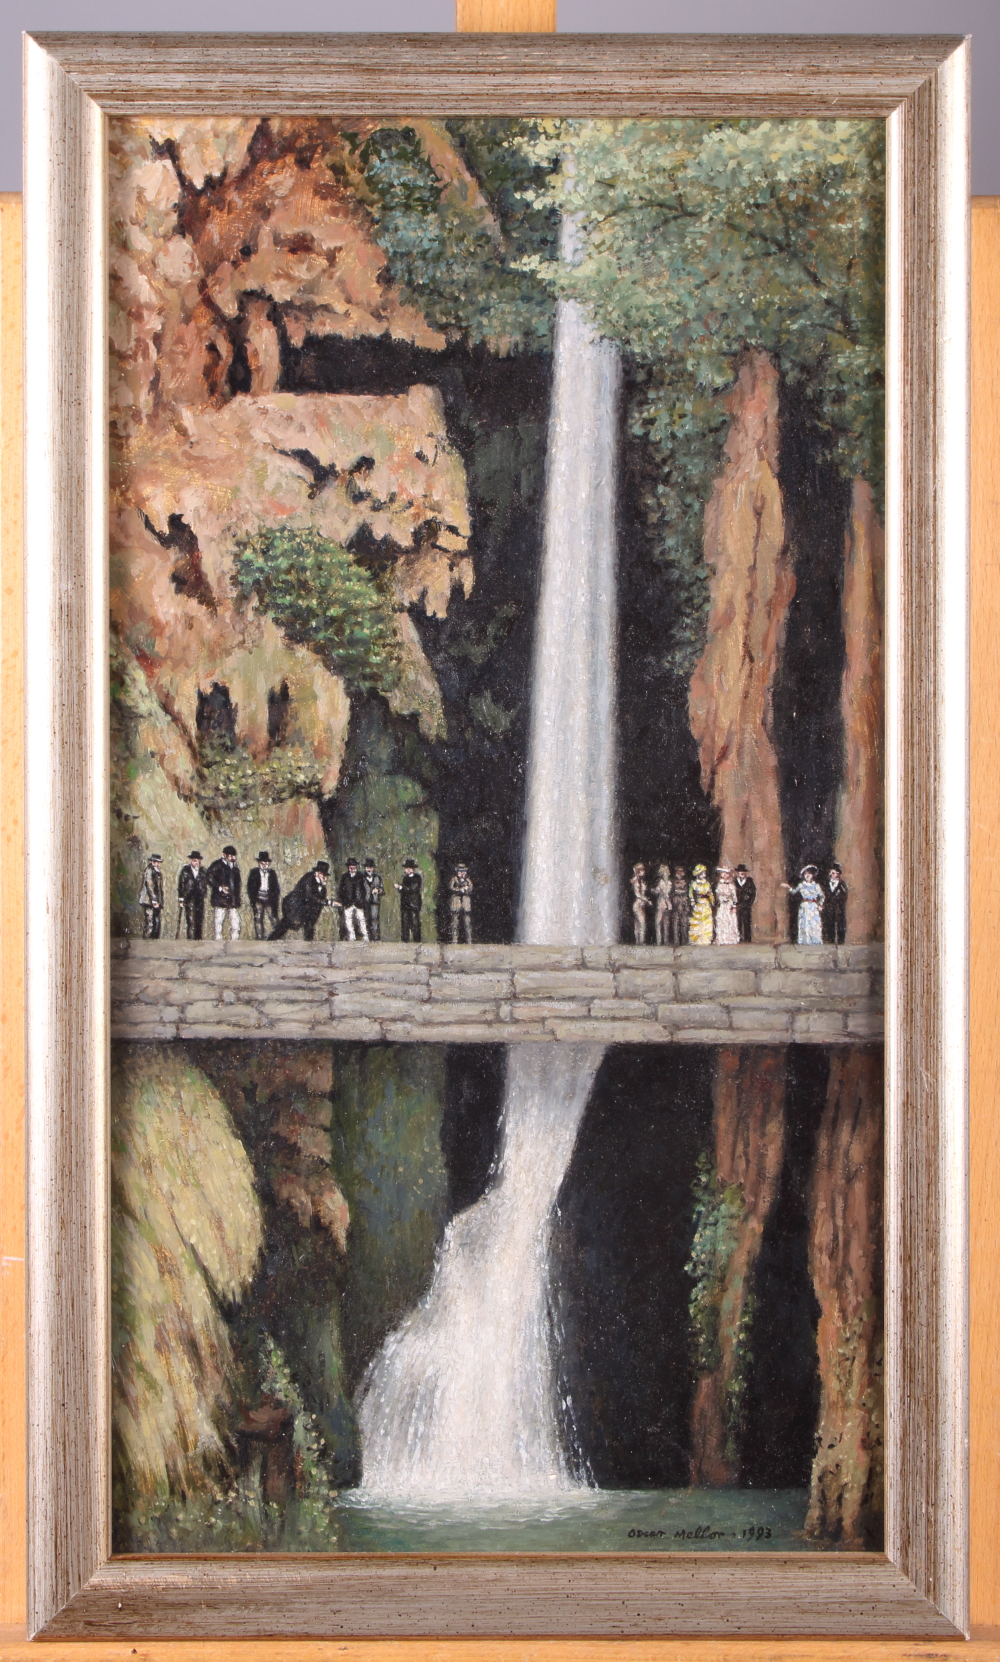 Oscar Mellor: oil on board, "A Game in Progress", figures on a bridge in front of a waterfall,